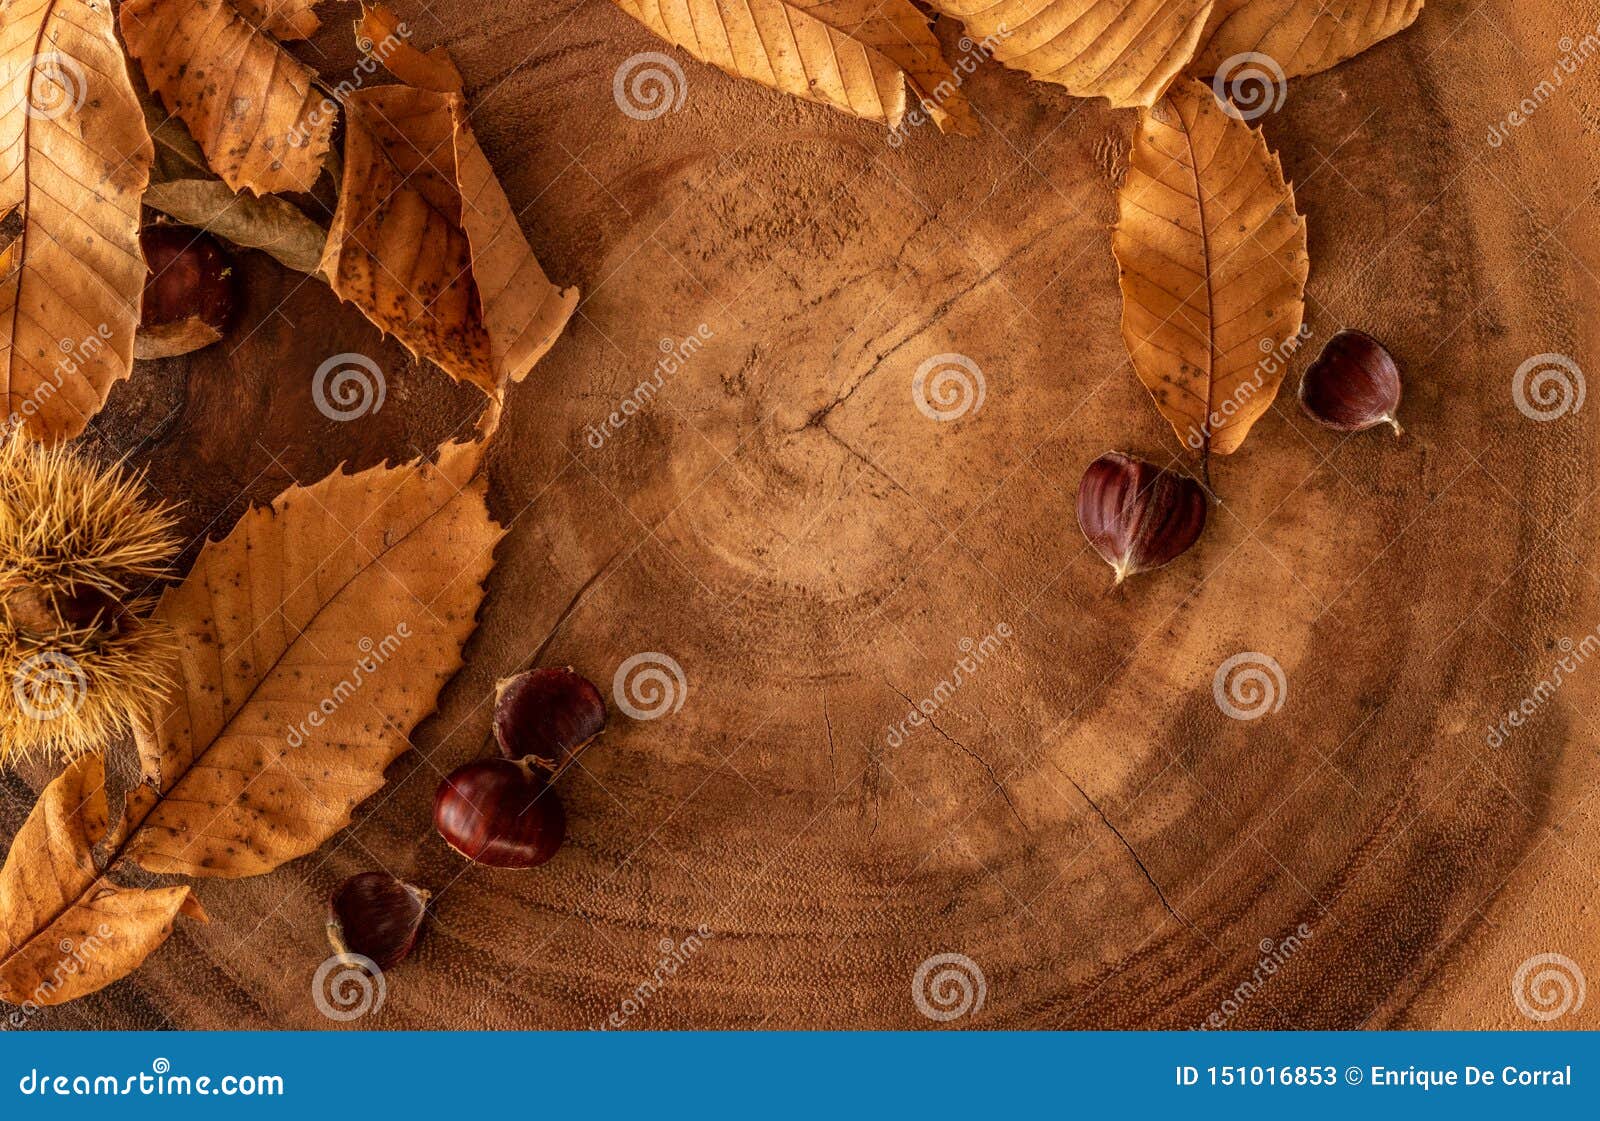 seasonal fall background with leaves, chestnuts and a log